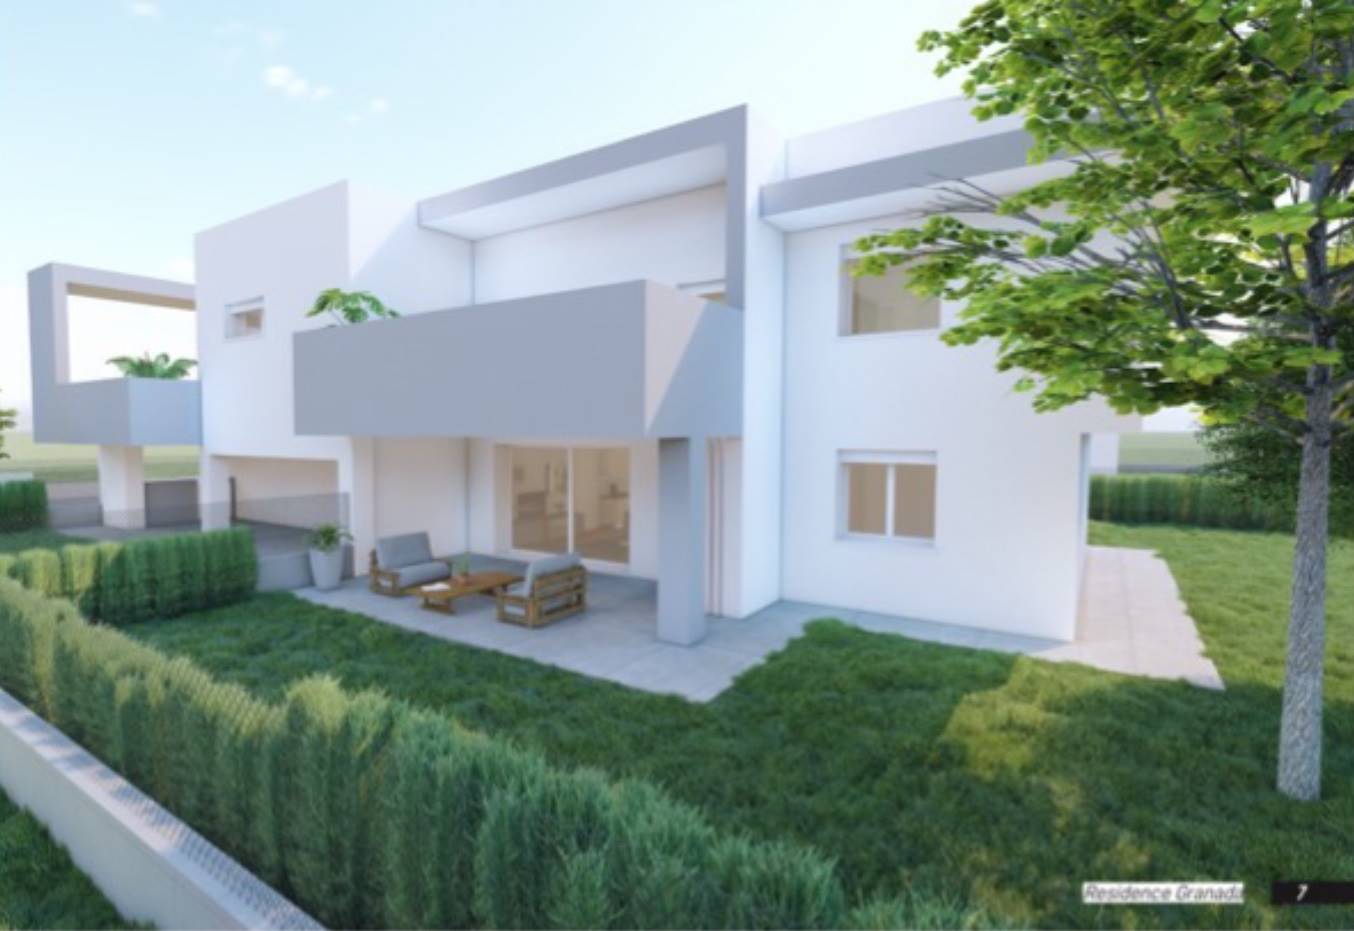 SALZANO, Independent Apartment for sale of 75 Sq. mt., New construction, Heating To floor, Energetic class: A4, placed at Ground on 1, composed by: 3 